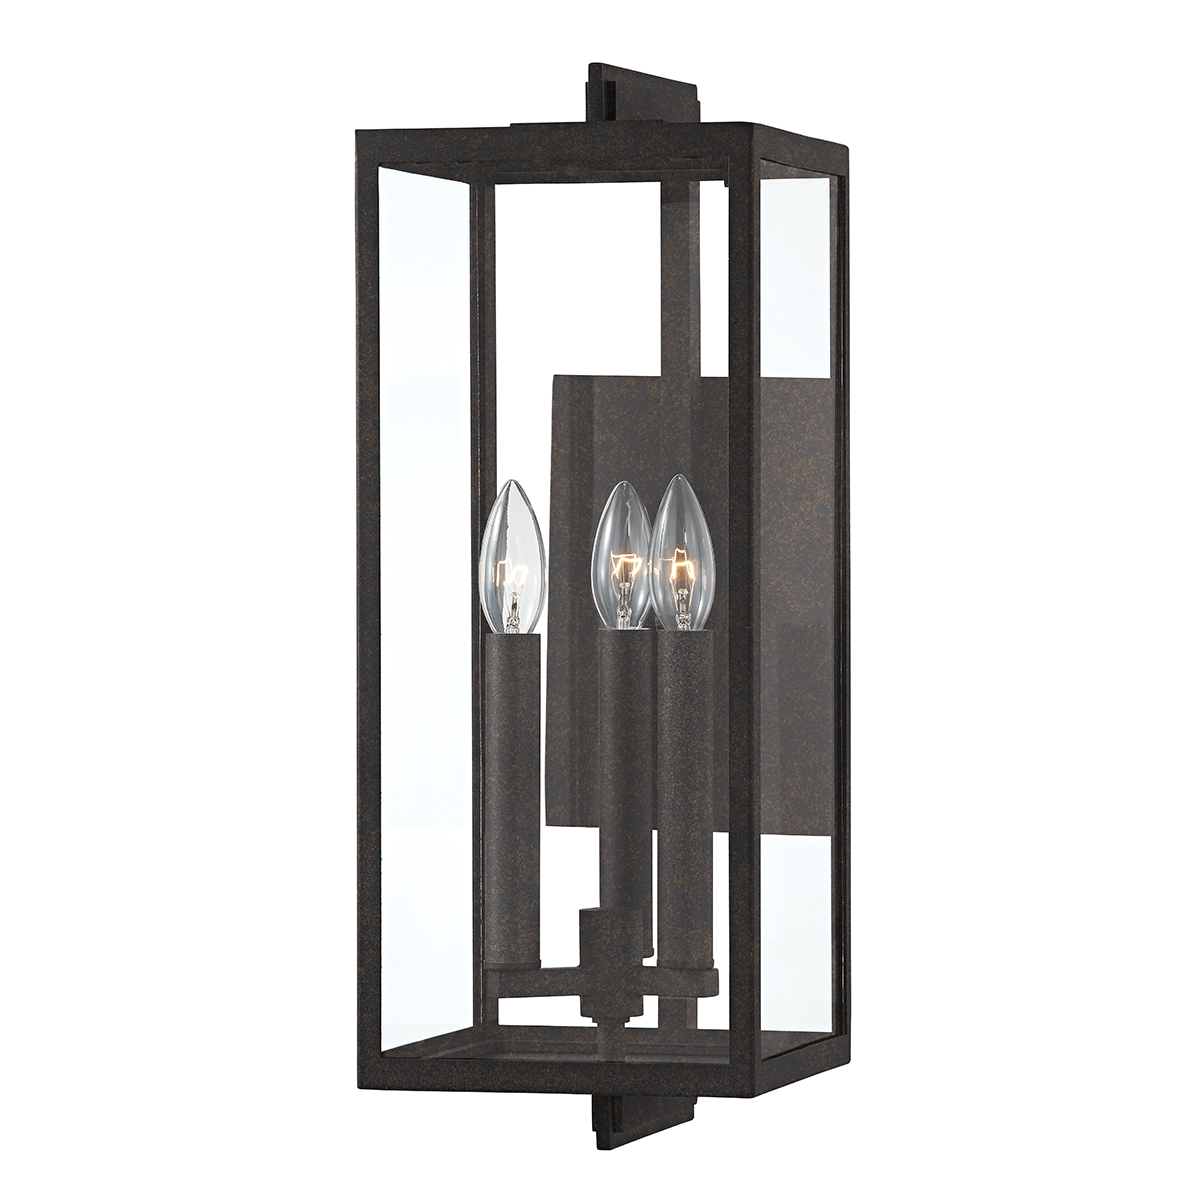 Troy Lighting 3 LIGHT EXTERIOR WALL SCONCE B5513 Outdoor l Wall Troy Lighting FRENCH IRON  